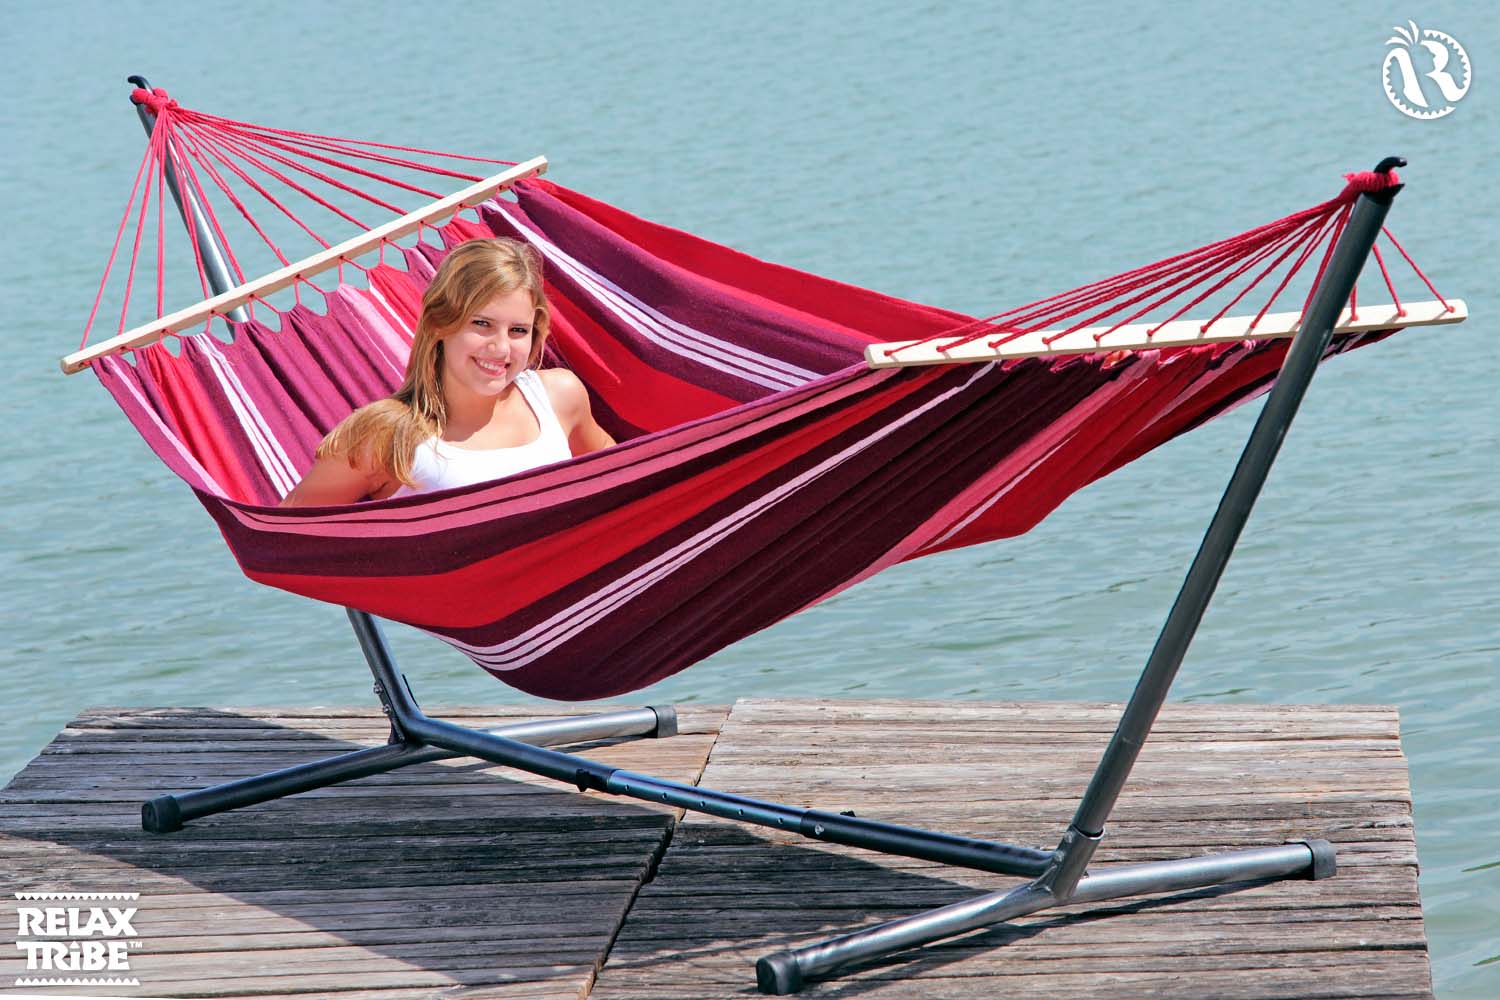 samba-fuego-double-xl-weatherproof-hammock-with-bars-red-bordeaux-outdoor-metal-stand